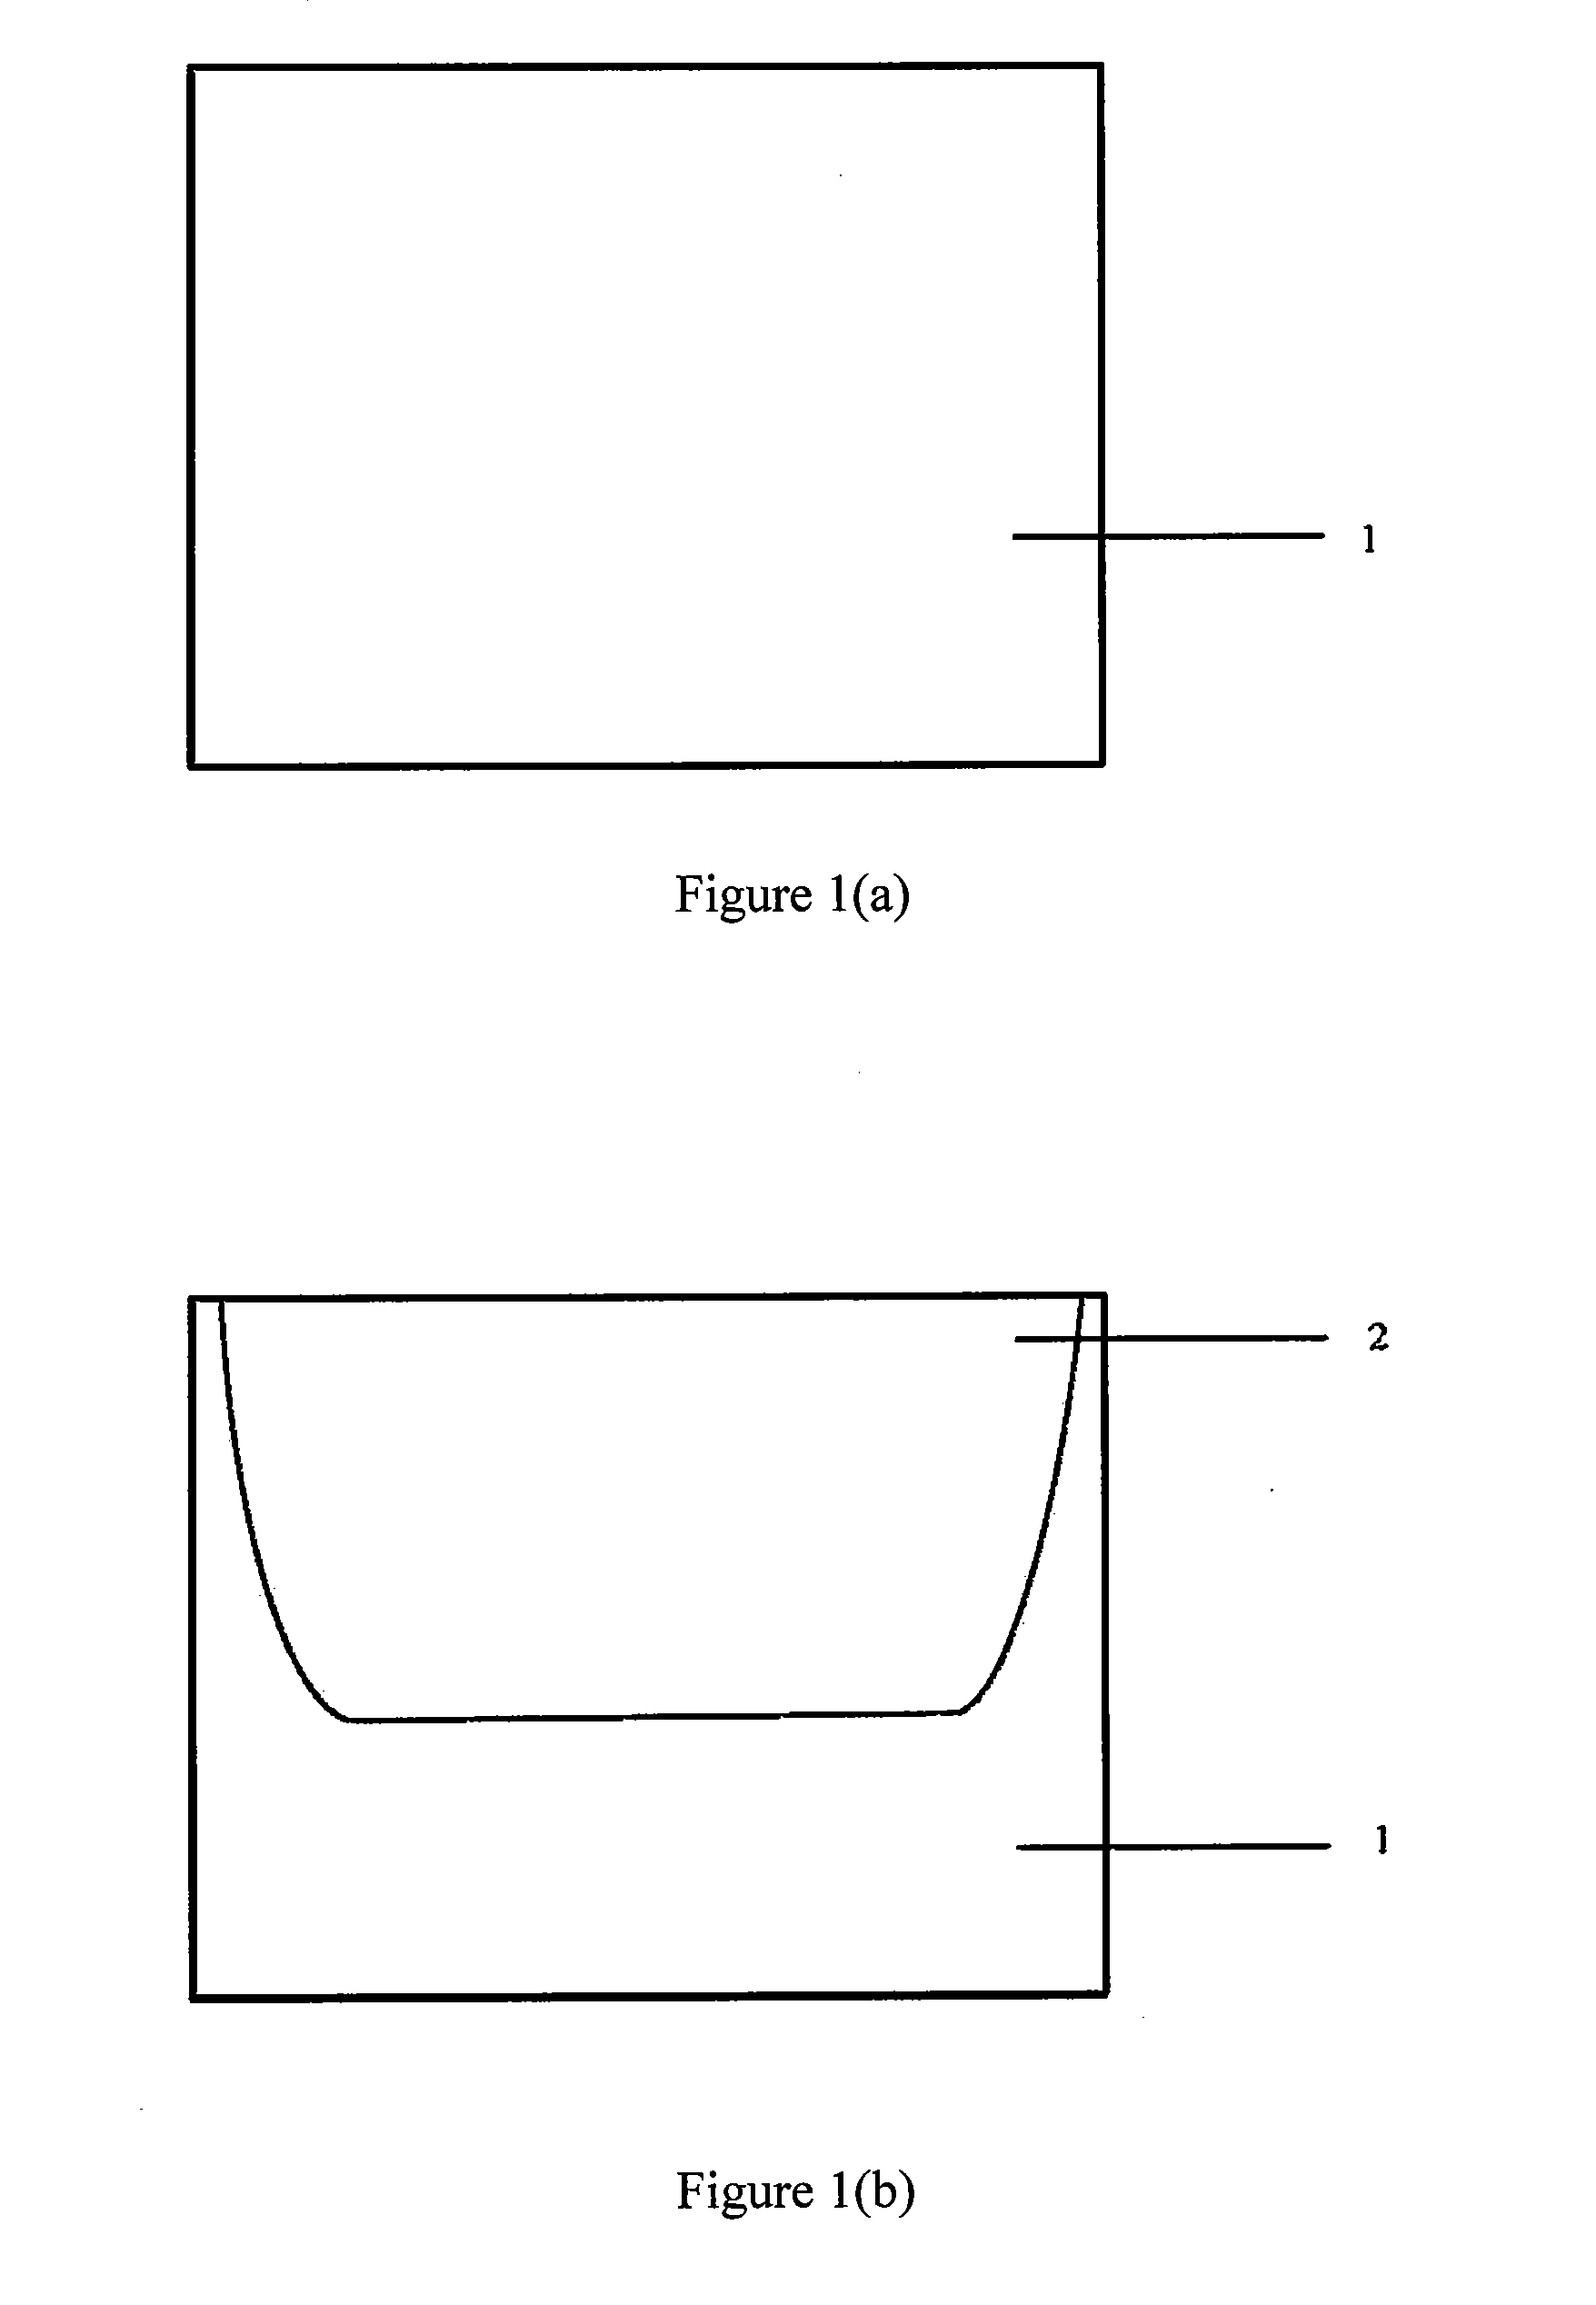 Germanium-based nmos device and method for fabricating the same